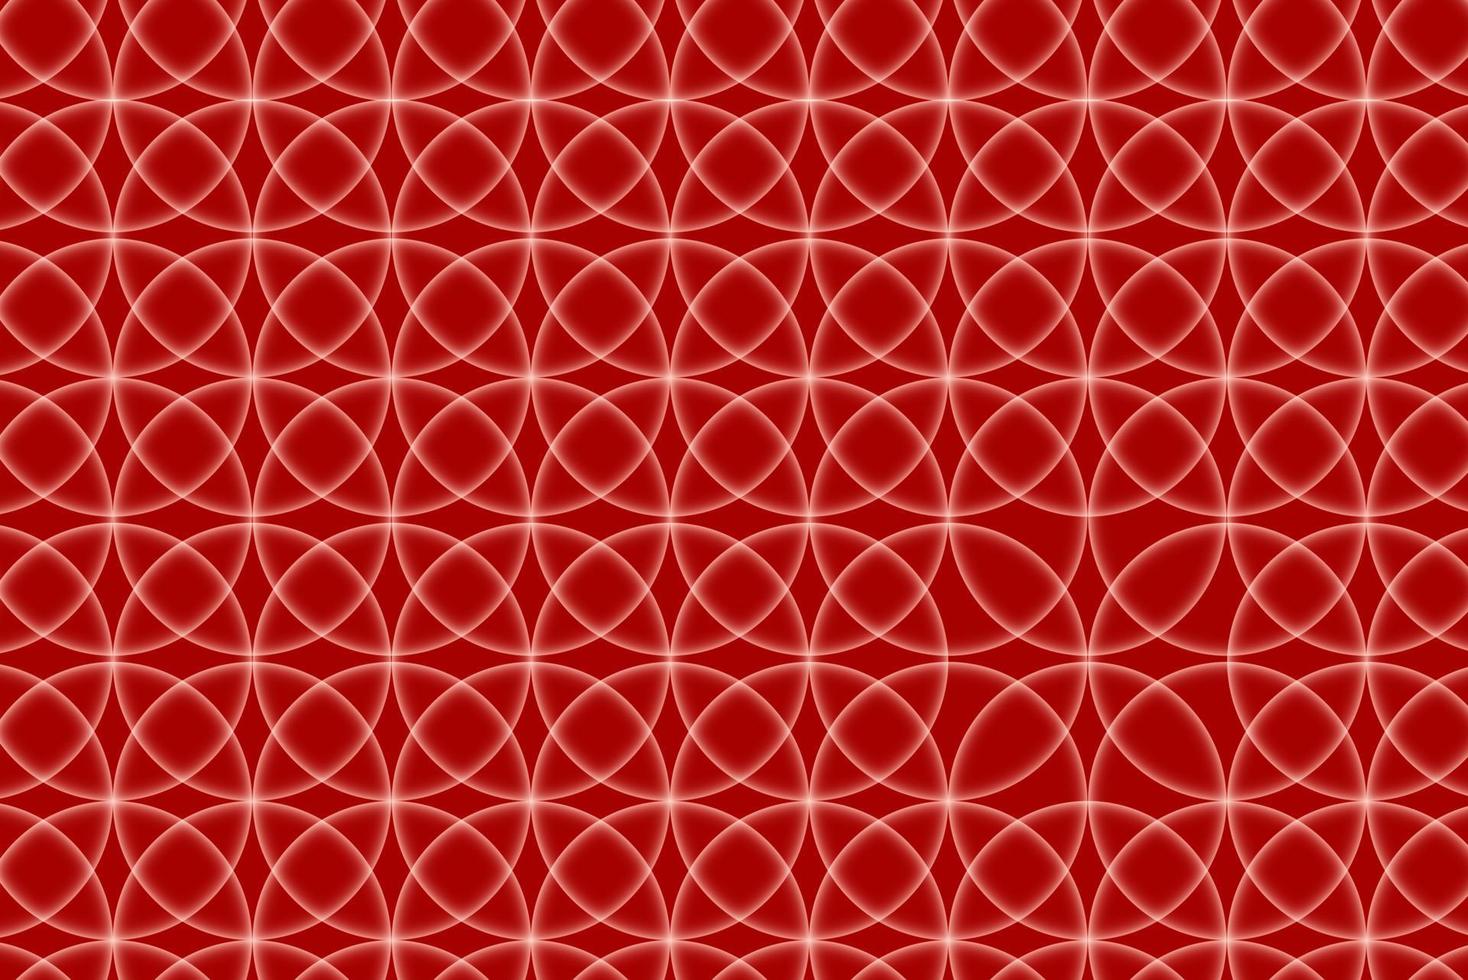 Geometric pattern vector graphic illustration of grid or shape for background